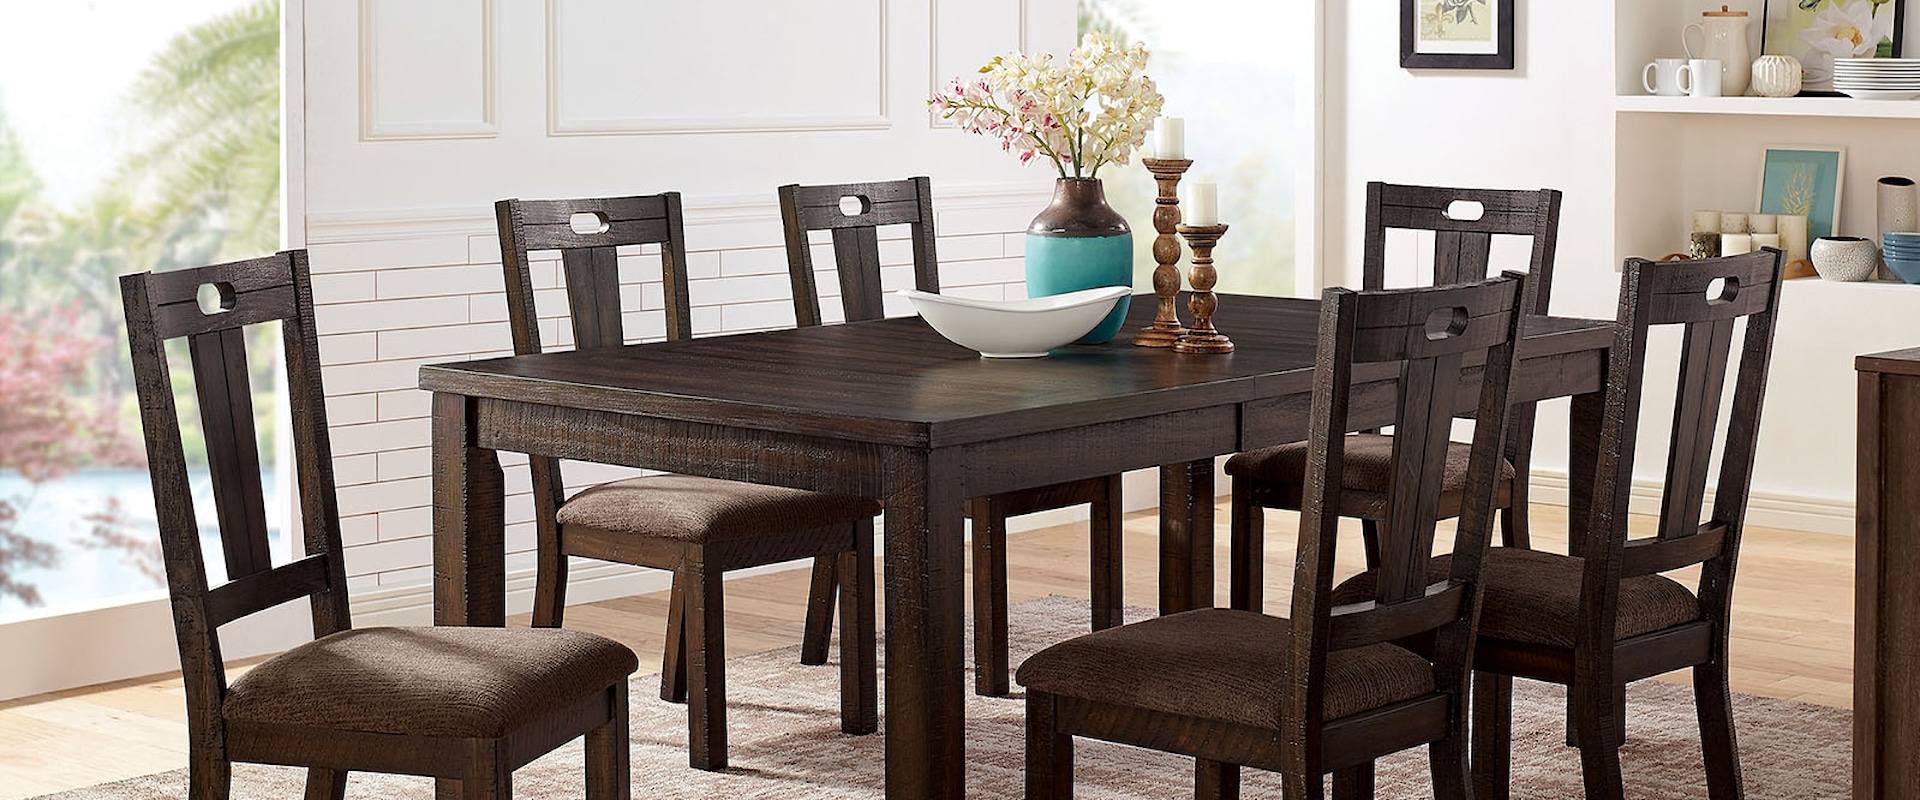 Rustic 7 Piece Dining Table Set